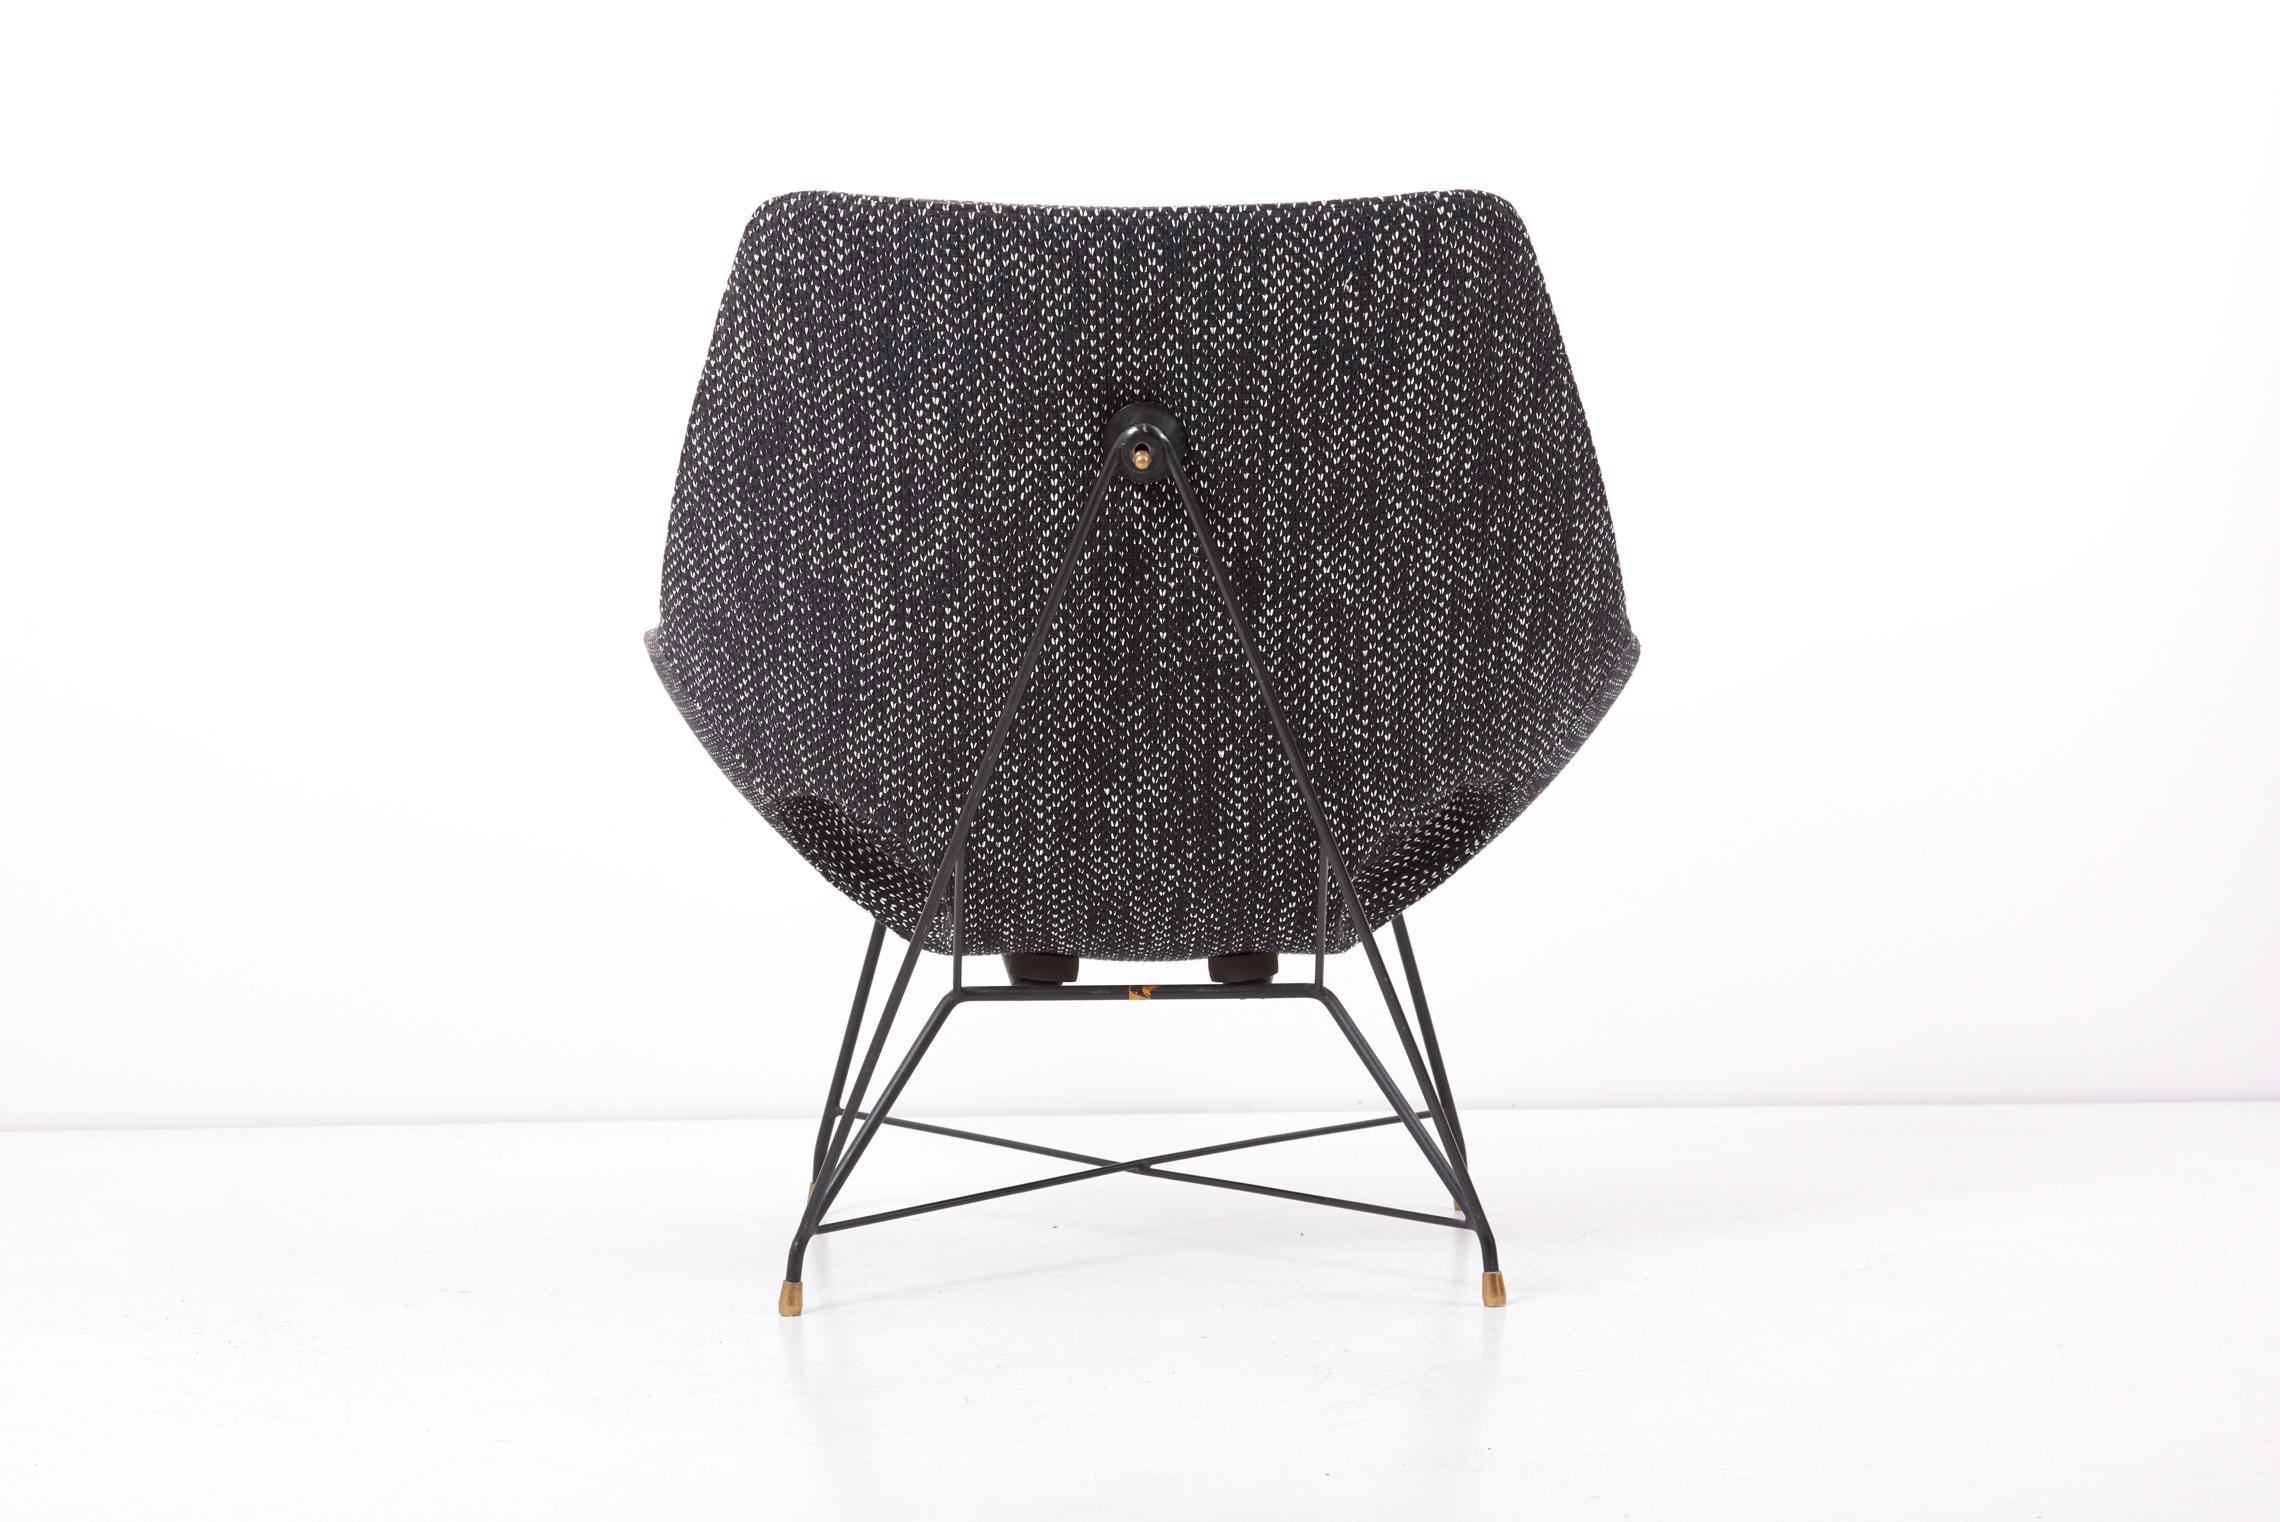 Lounge Chair by Augusto Bozzi for Saporiti in black & white fabric, Italy, 1950s For Sale 2